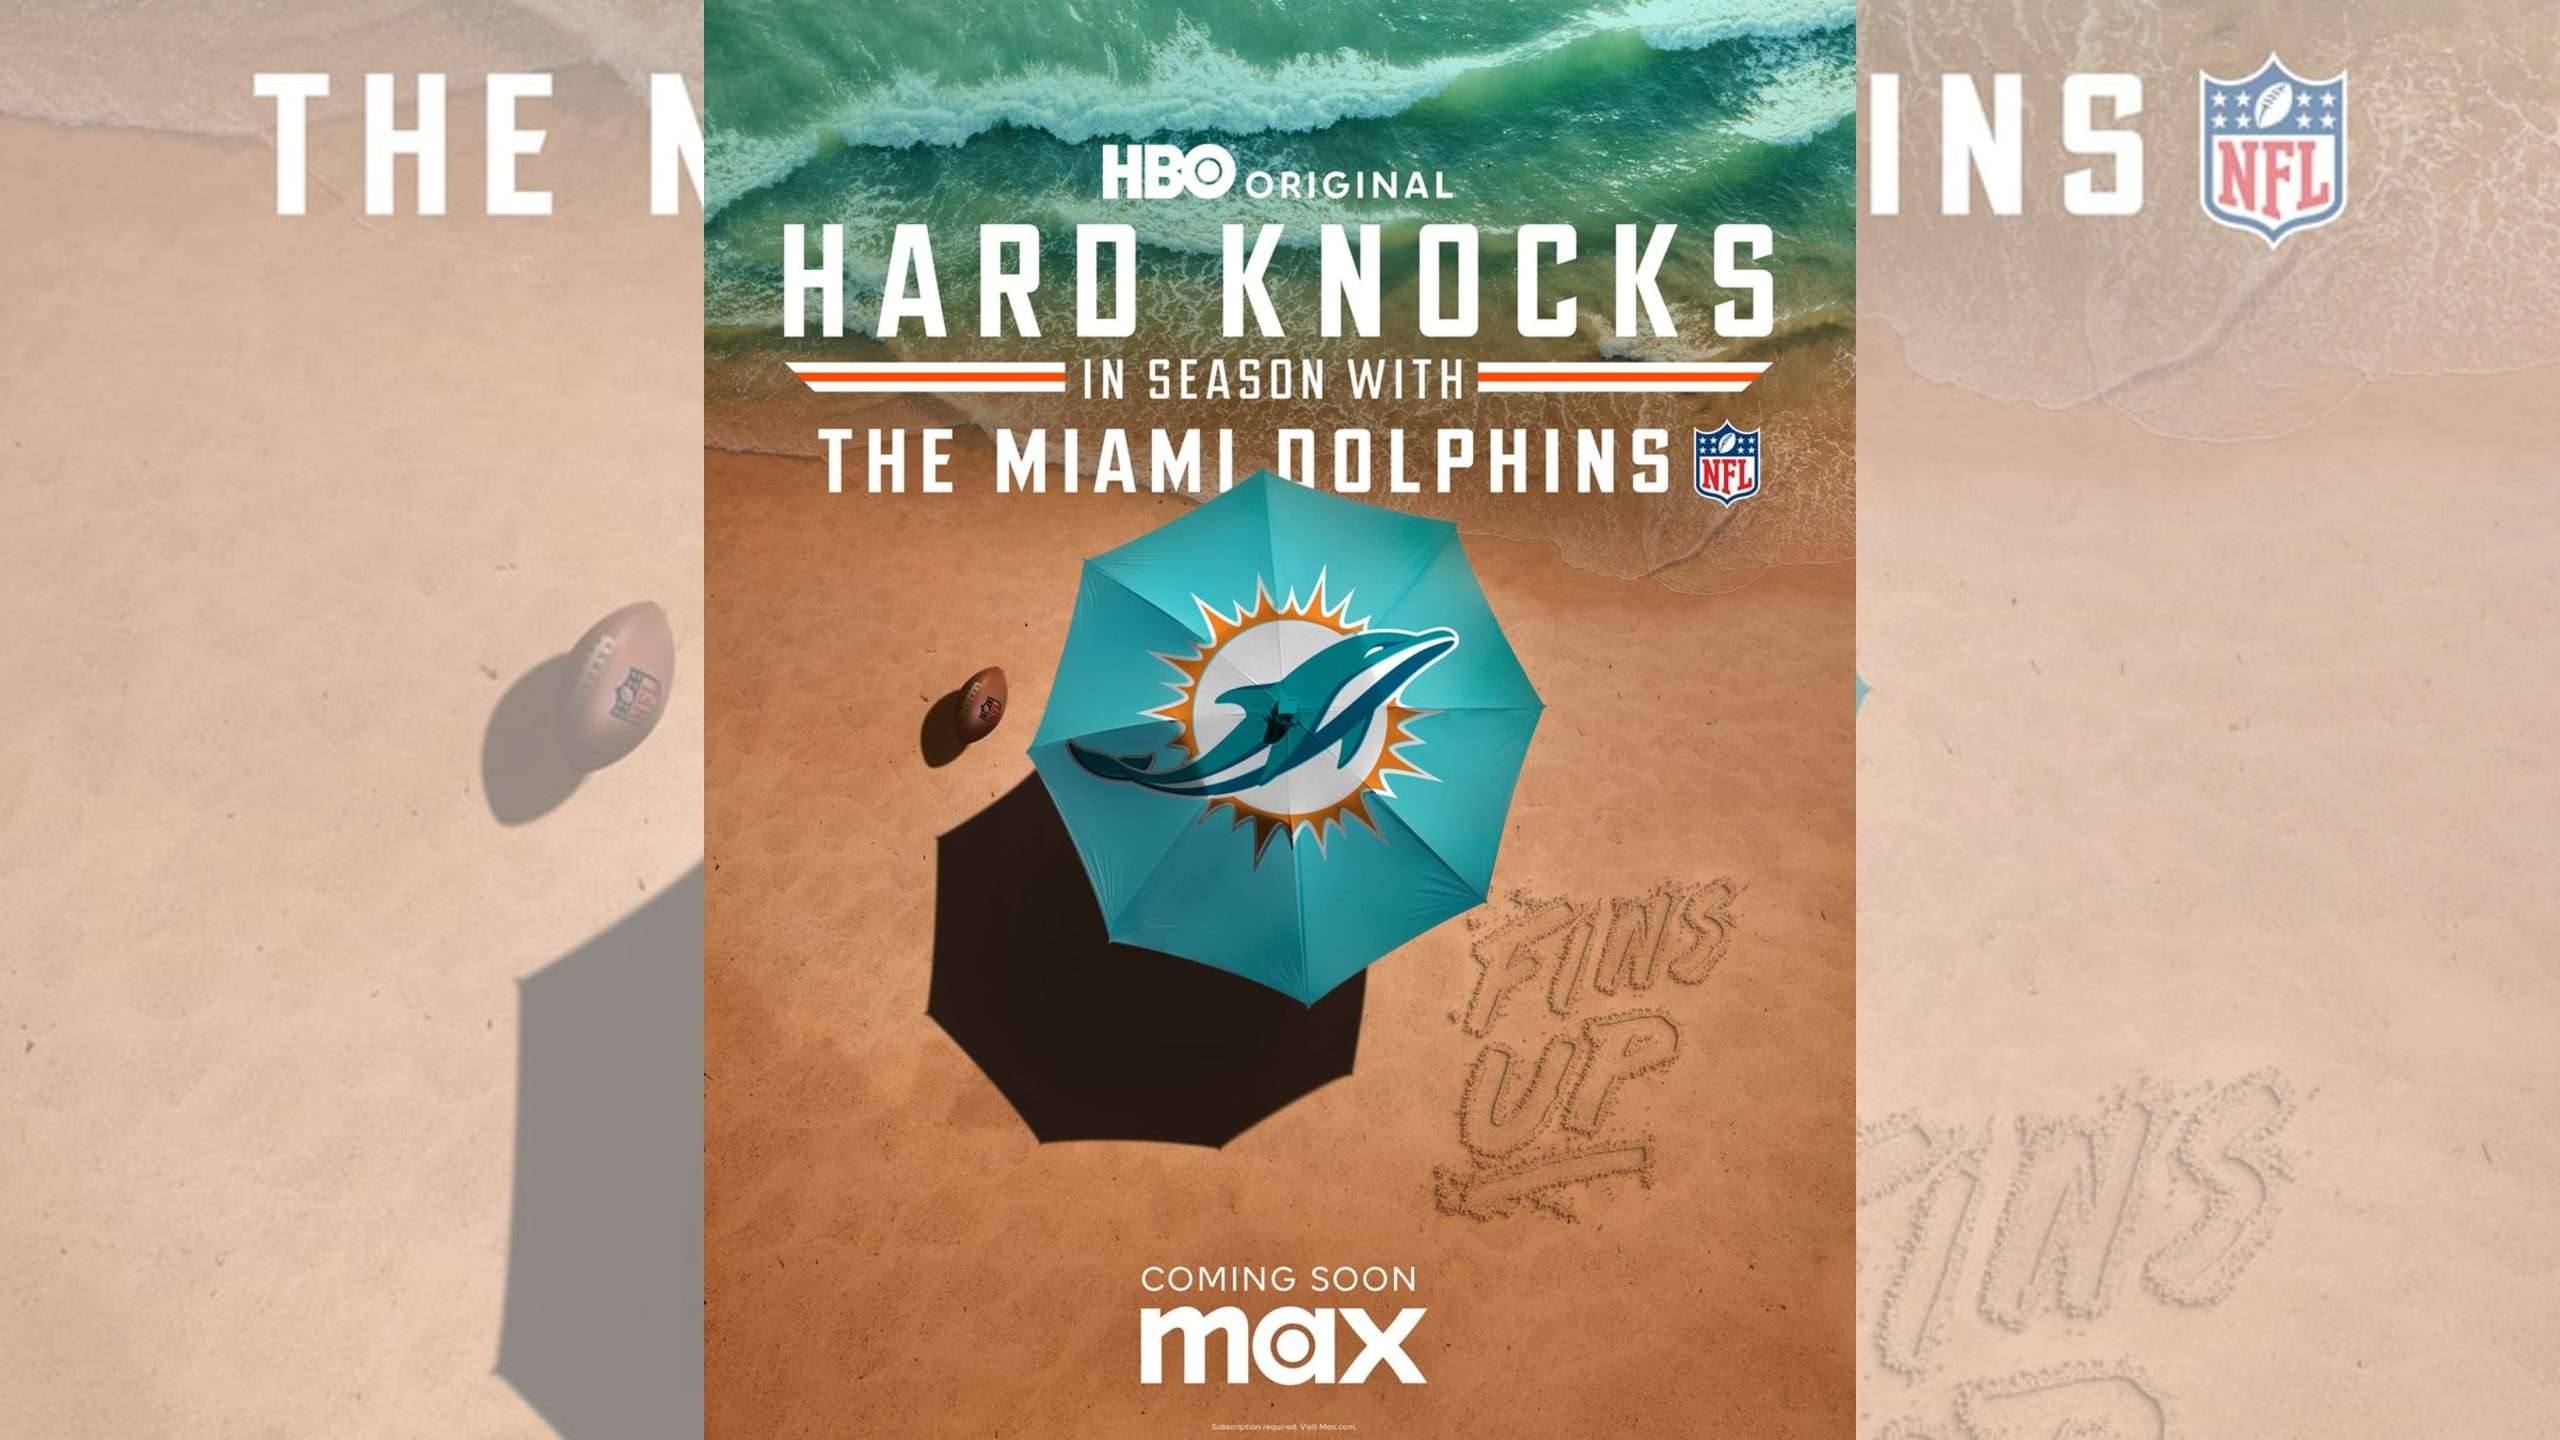 ‘Hard Knocks In Season’ will feature the Miami Dolphins